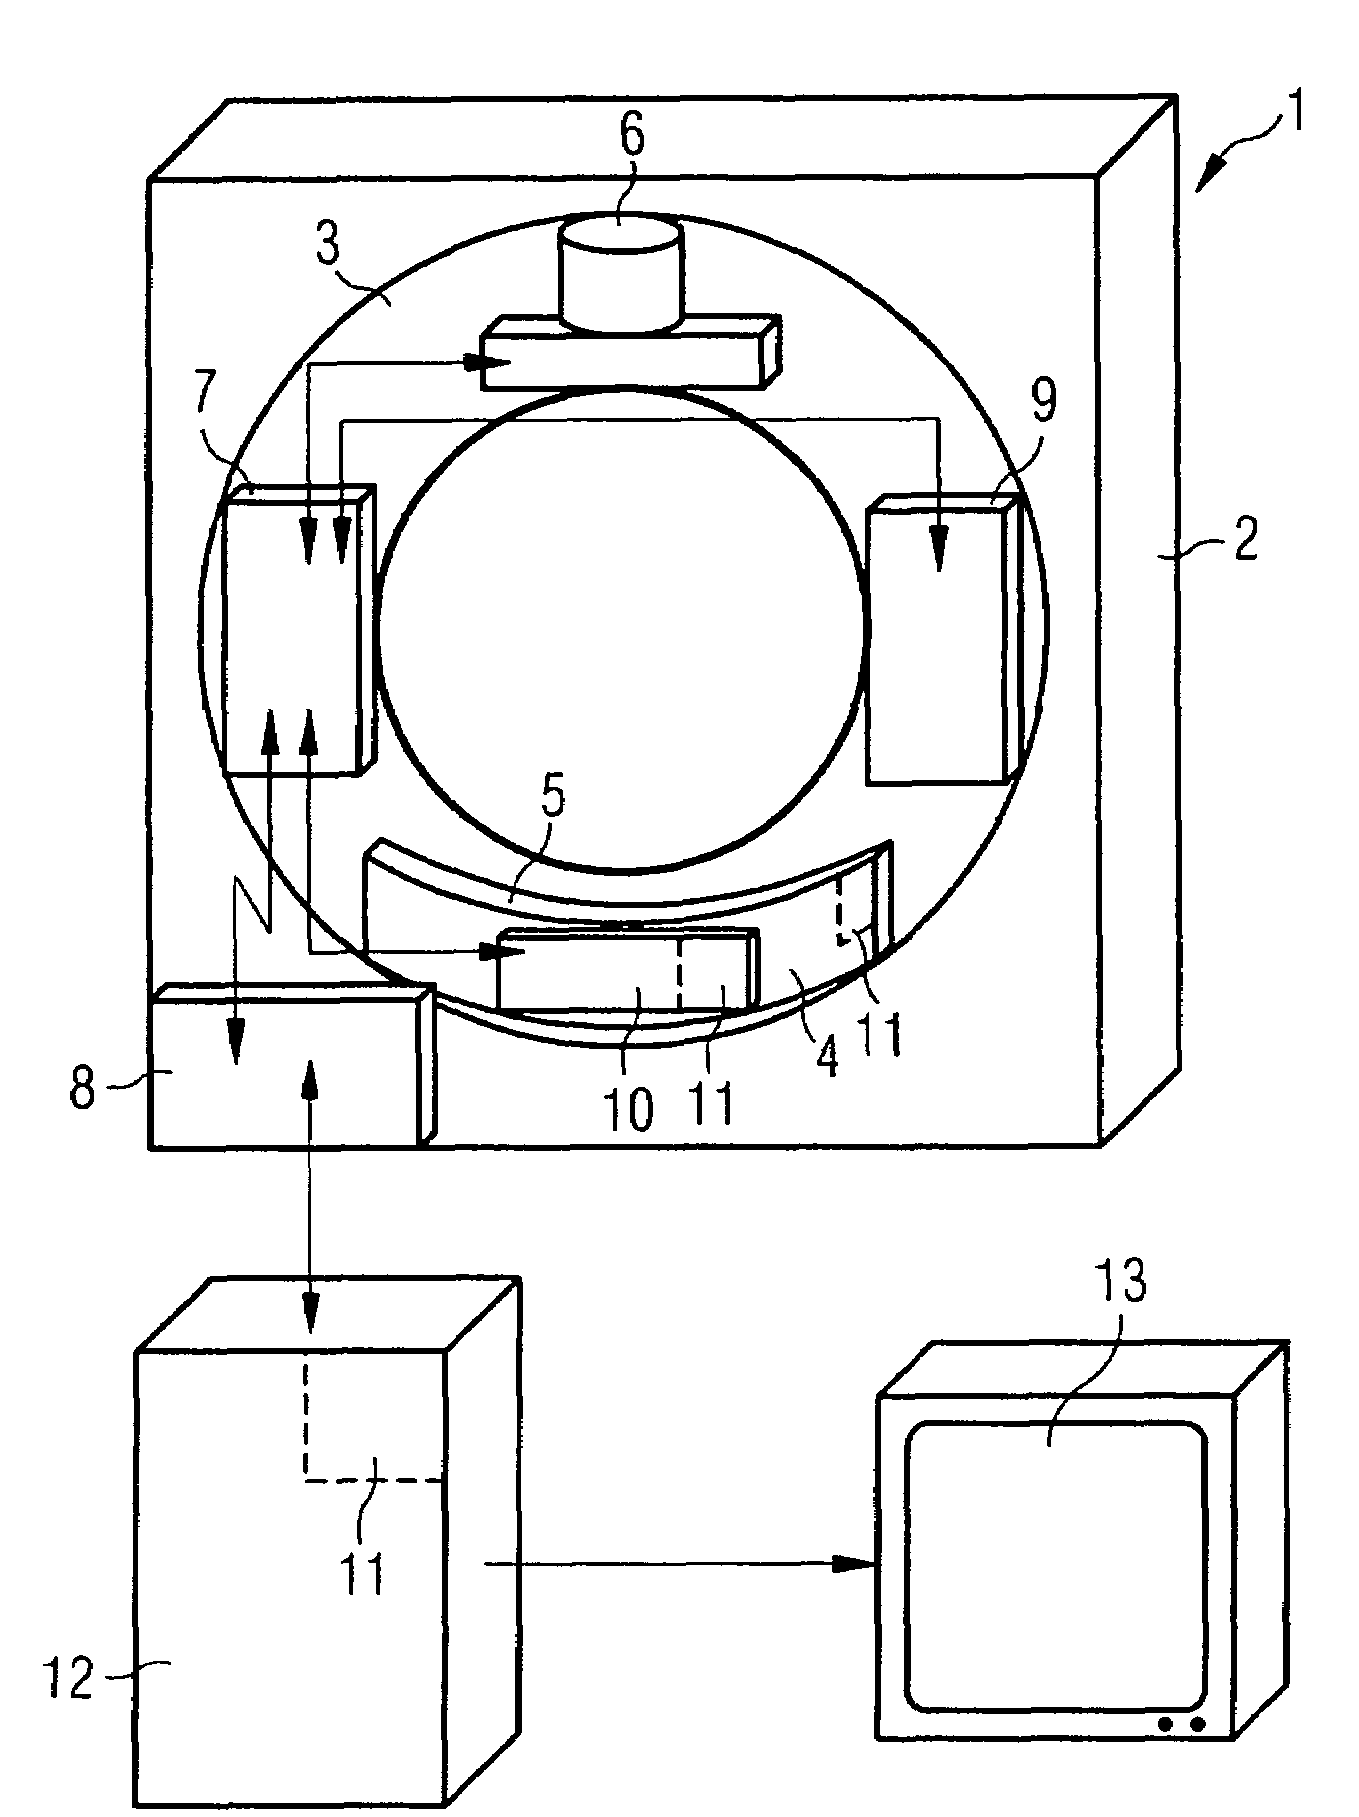 Method for operation of a counting radiation detector with improved linearity